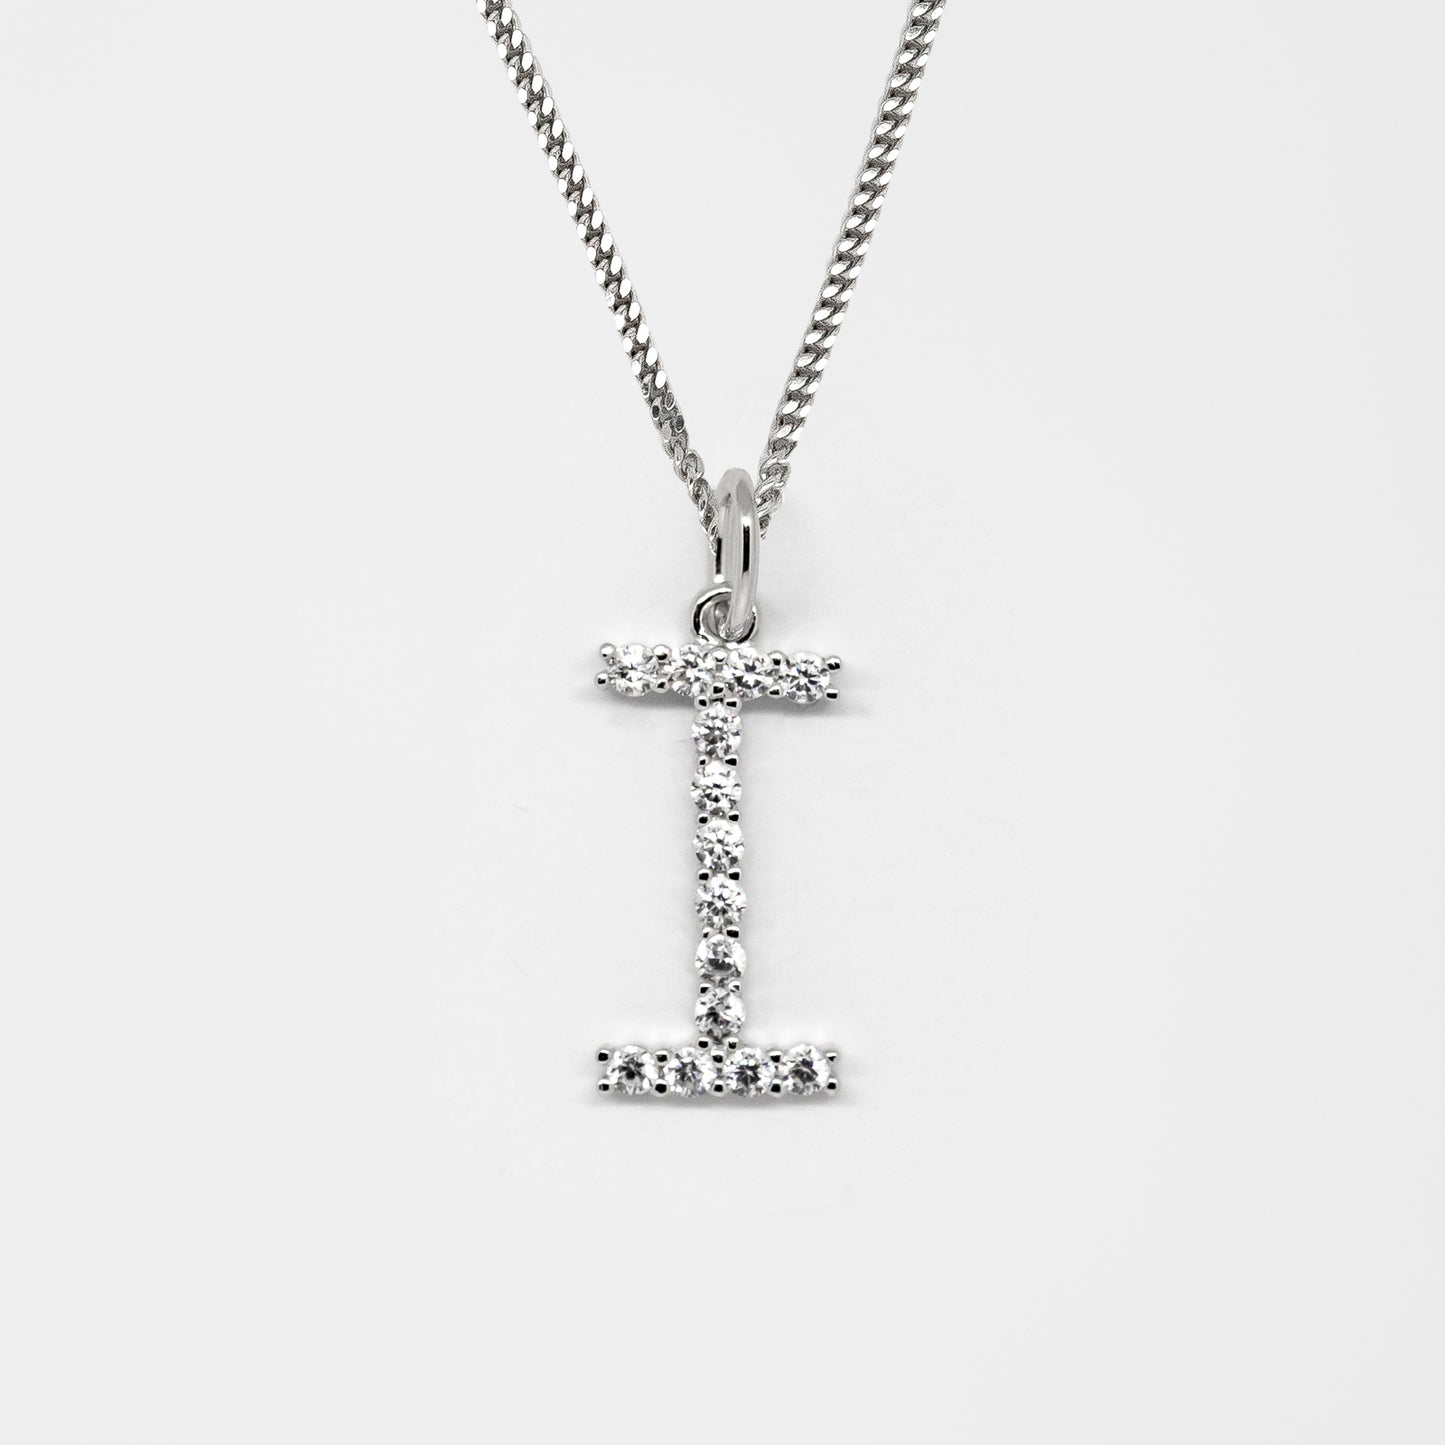 Silver 925 Initial Necklace - I